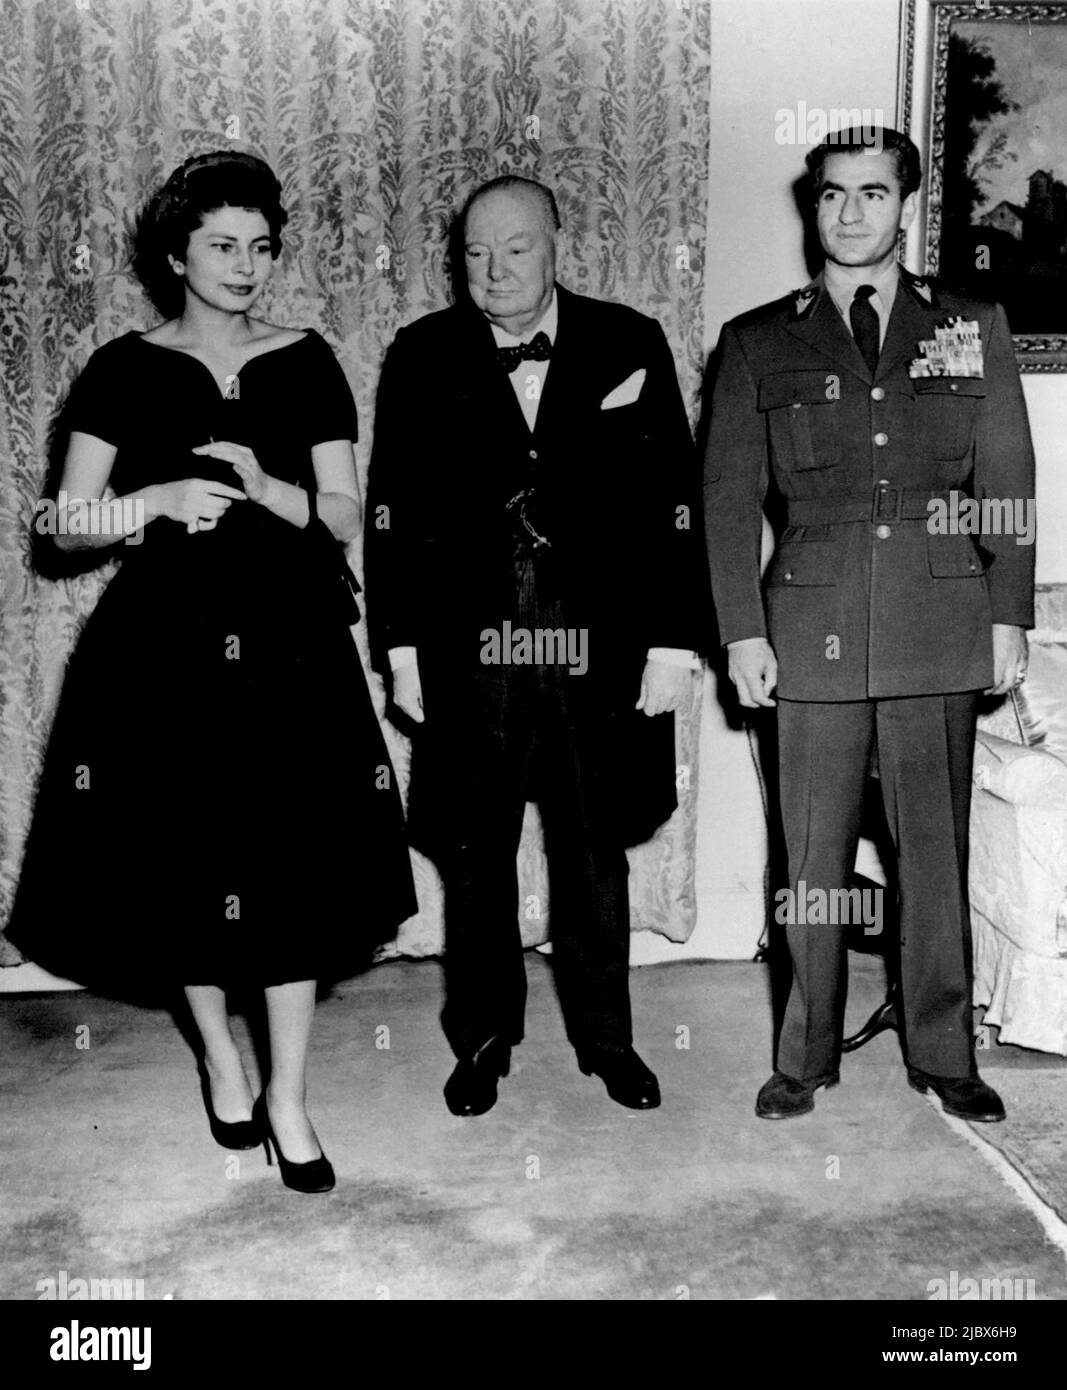 Royal Visitors to the Prime Minister -- The Shah and Queen Soraya with Sir Winston Churchill before the Luncheon. The Shah of Persia with Queen Soraya - now in London on a private visit - had Luncheon with Sir Winston Churchill at No. 10 Downing St. February 22, 1955. (Photo by Sport & General Press Agency, Limited) Stock Photo